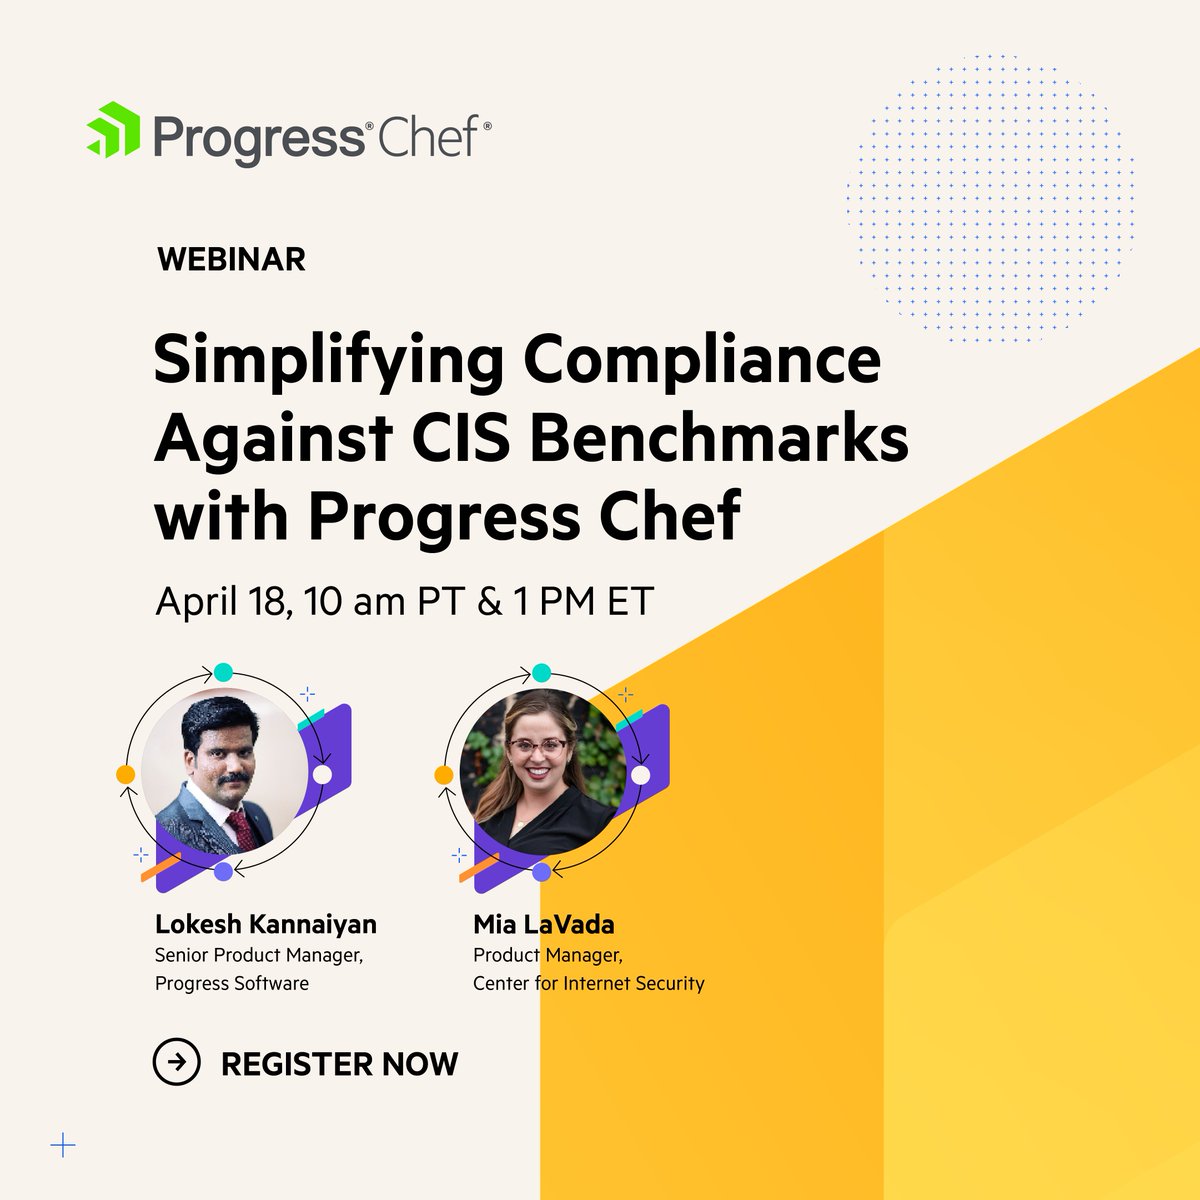 Join Progress and CIS on April 18 to learn about “Simplifying Compliance Against CIS Benchmarks with Progress Chef.' Save your spot: prgress.co/3vIMaeb